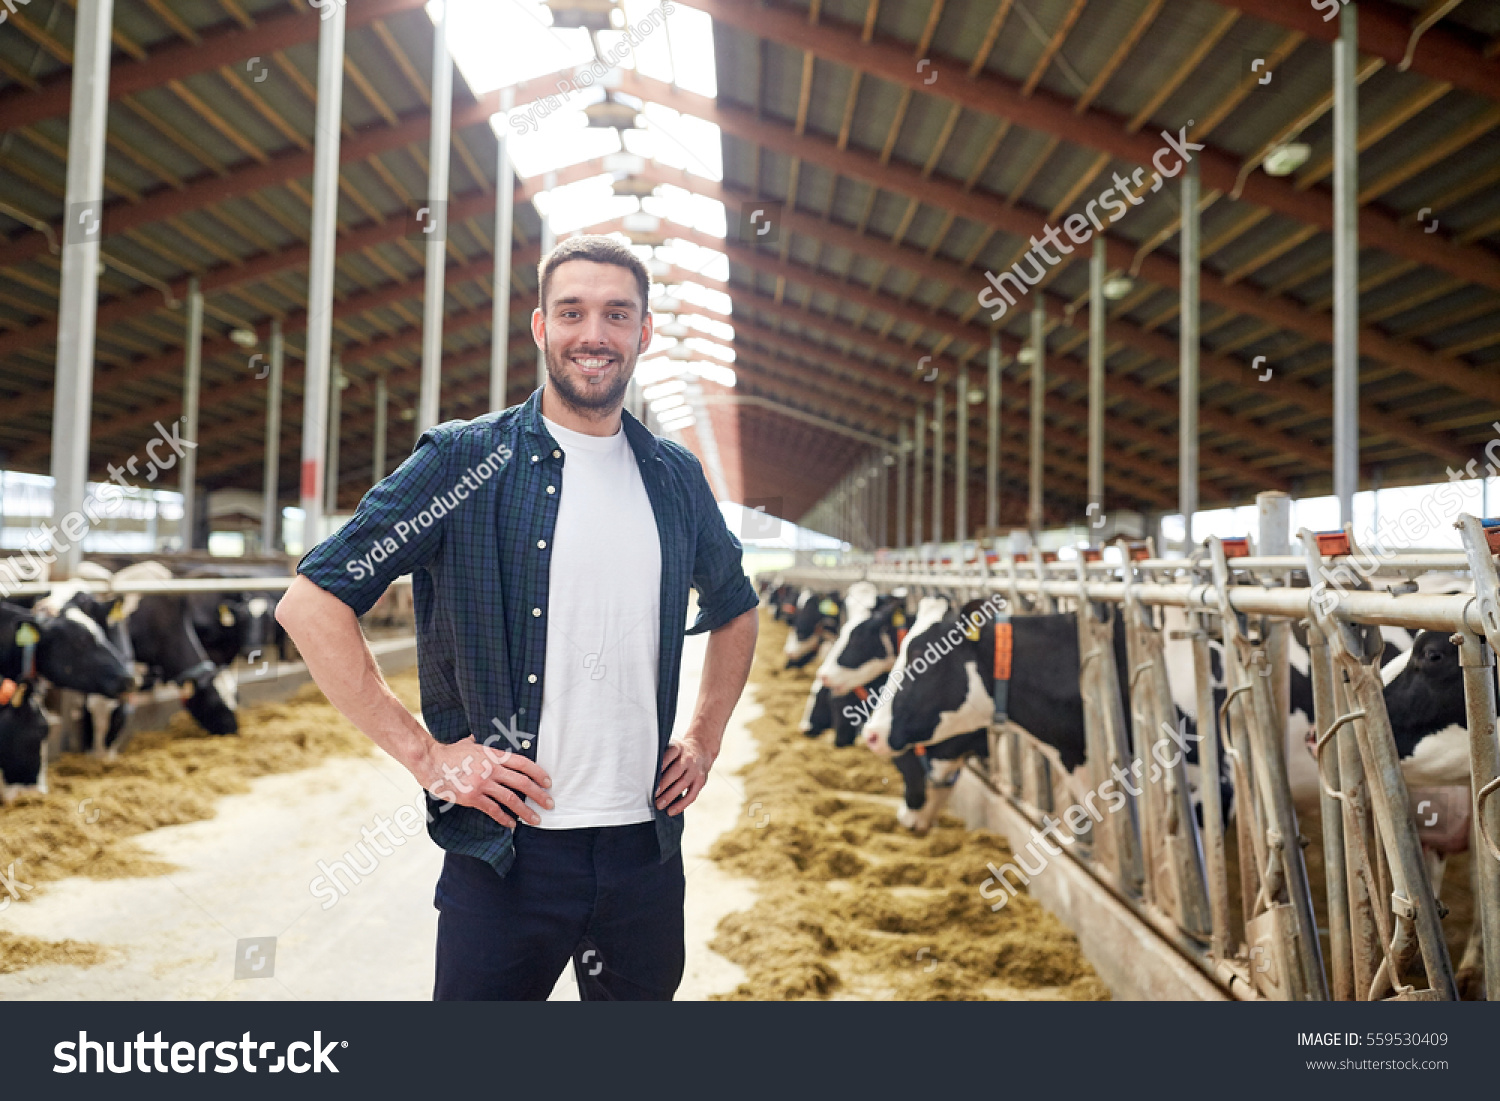 agriculture industry, farming, people and animal husbandry concept - happy smiling young man or farmer with herd of cows in cowshed on dairy farm #559530409